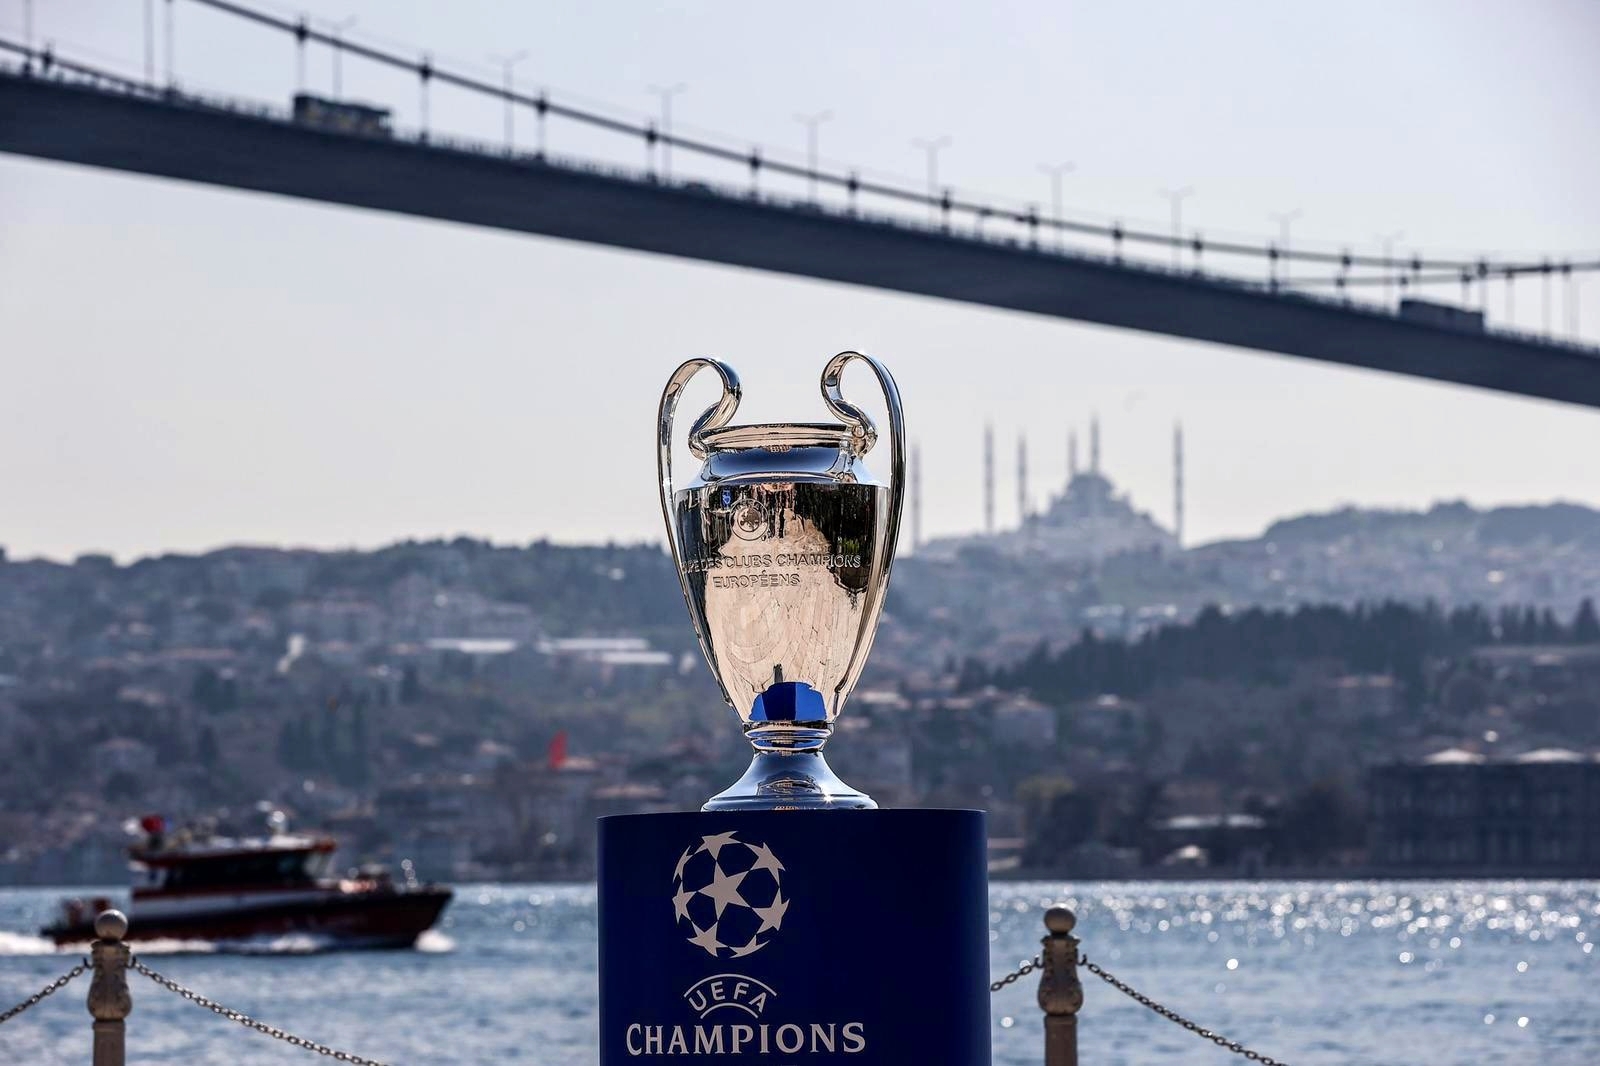 Istanbul will host UEFA Super Cup this year and 2023 Champions League final, claims Mehmet Kasapoglu